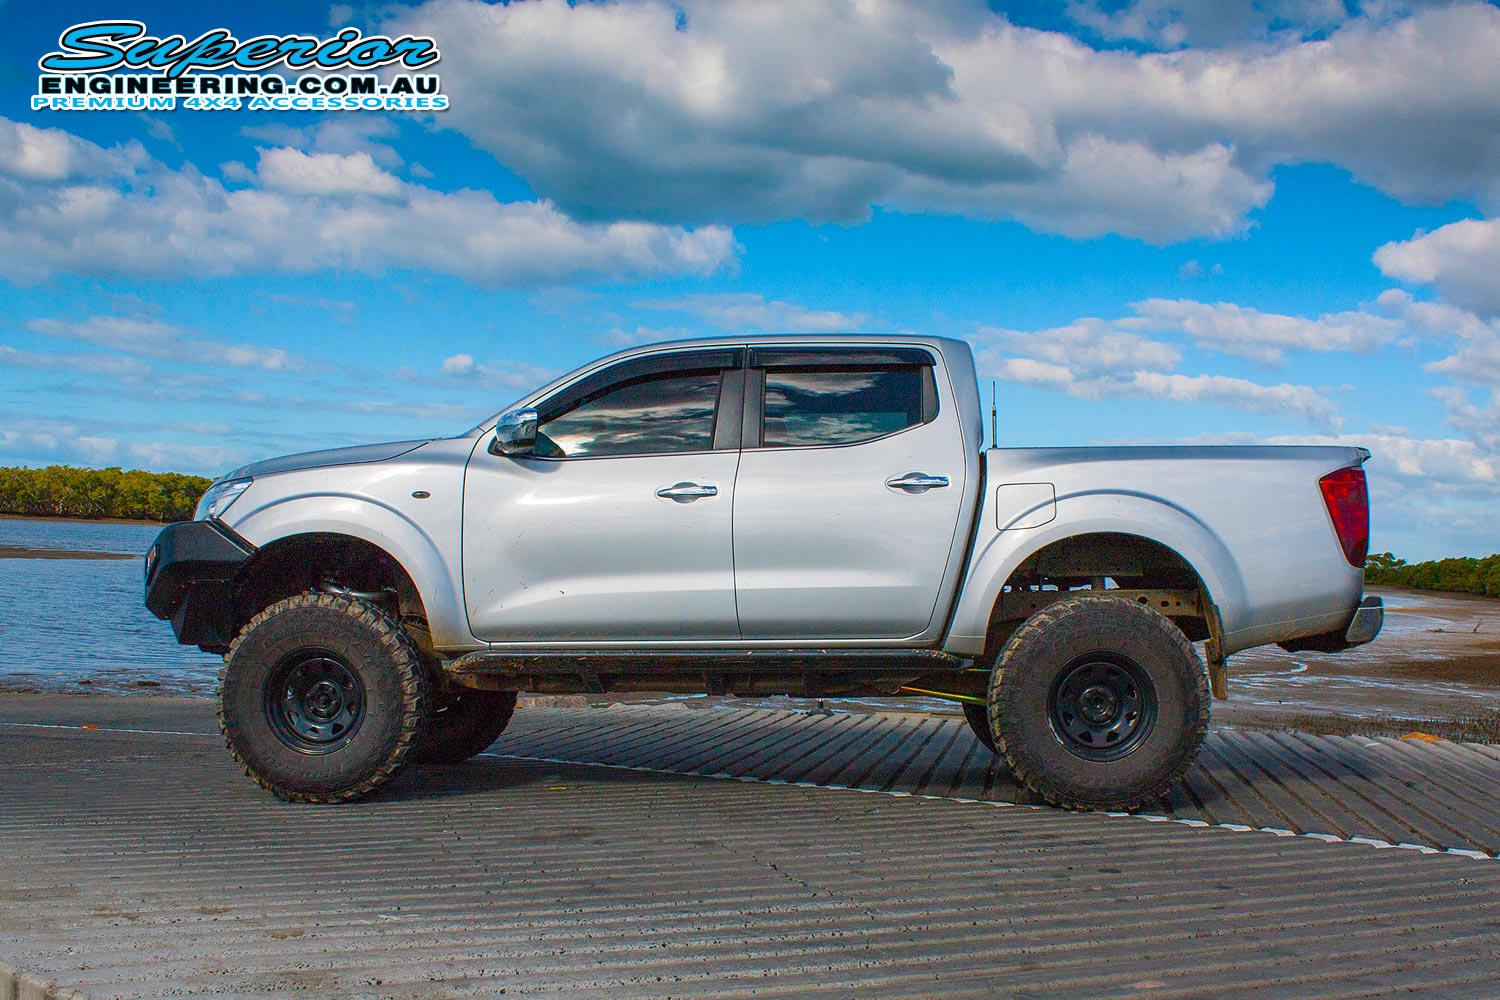 Left side view of an NP300 Nissan Navara (dual cab) after fitting a suspension kit by Superior Engineering